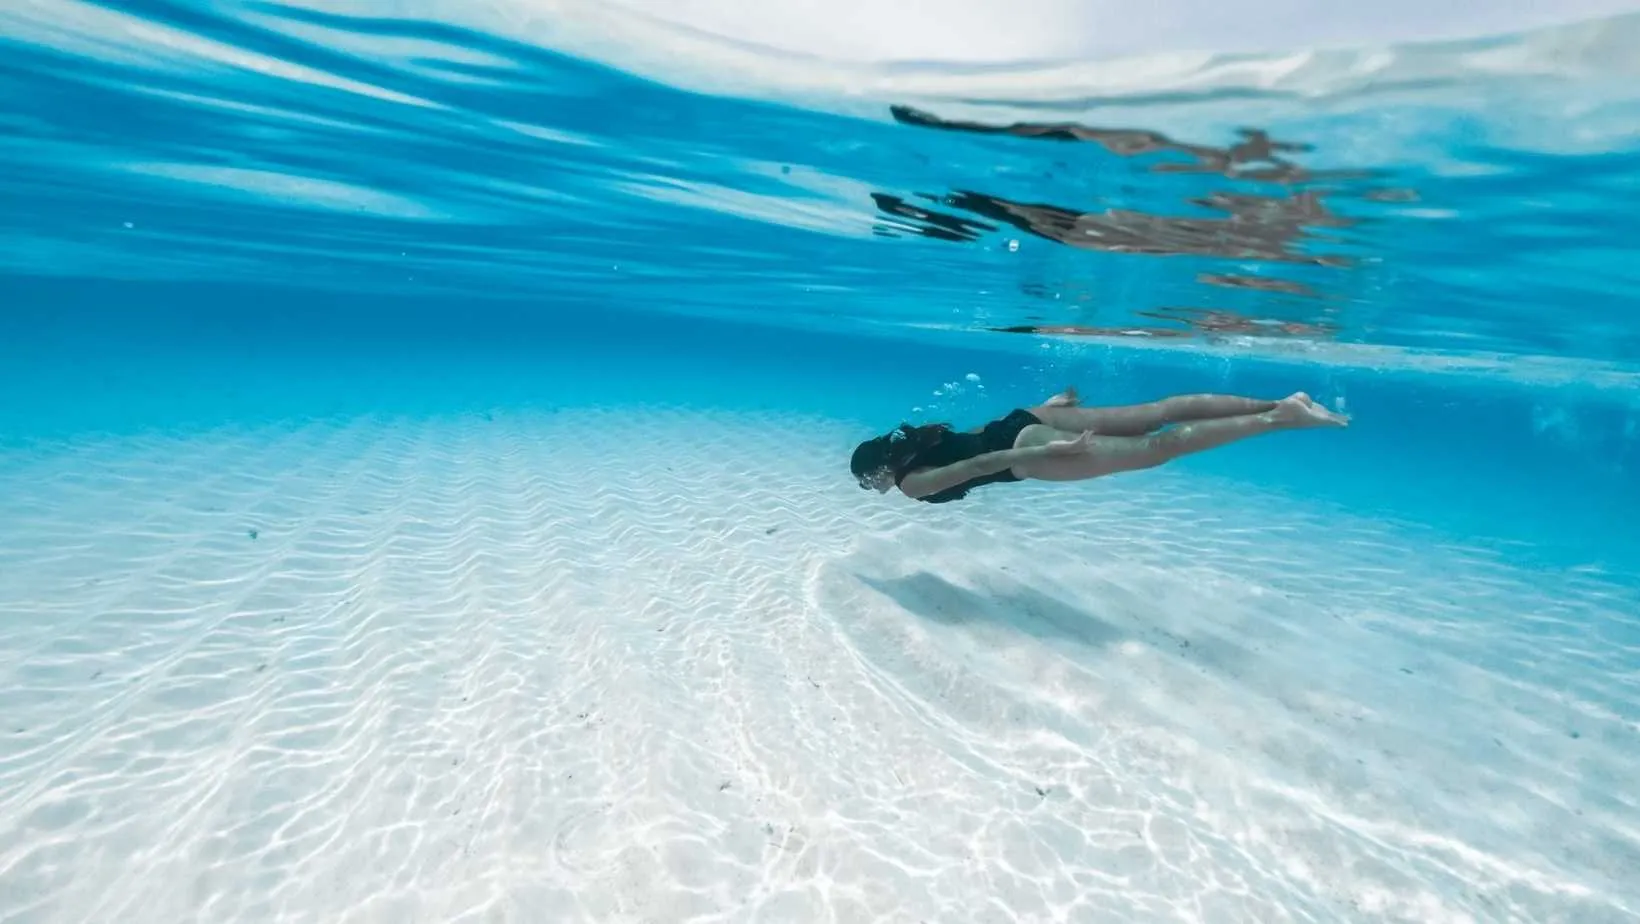 Can You Swim In Maldives Water?